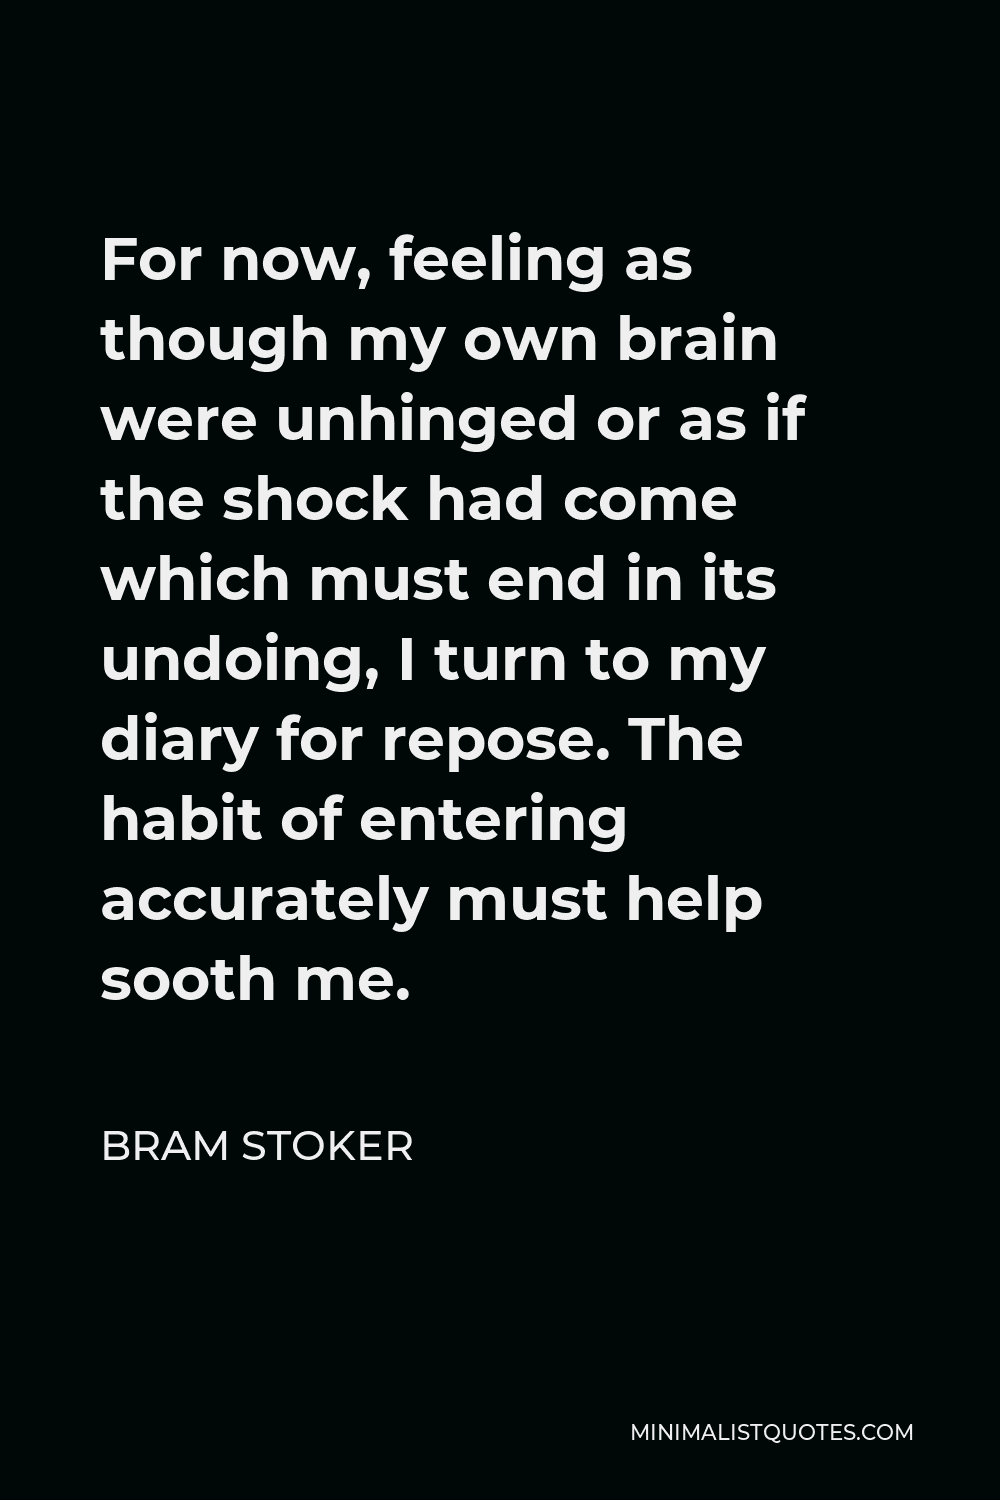 Bram Stoker Quote - For now, feeling as though my own brain were unhinged or as if the shock had come which must end in its undoing, I turn to my diary for repose. The habit of entering accurately must help sooth me.